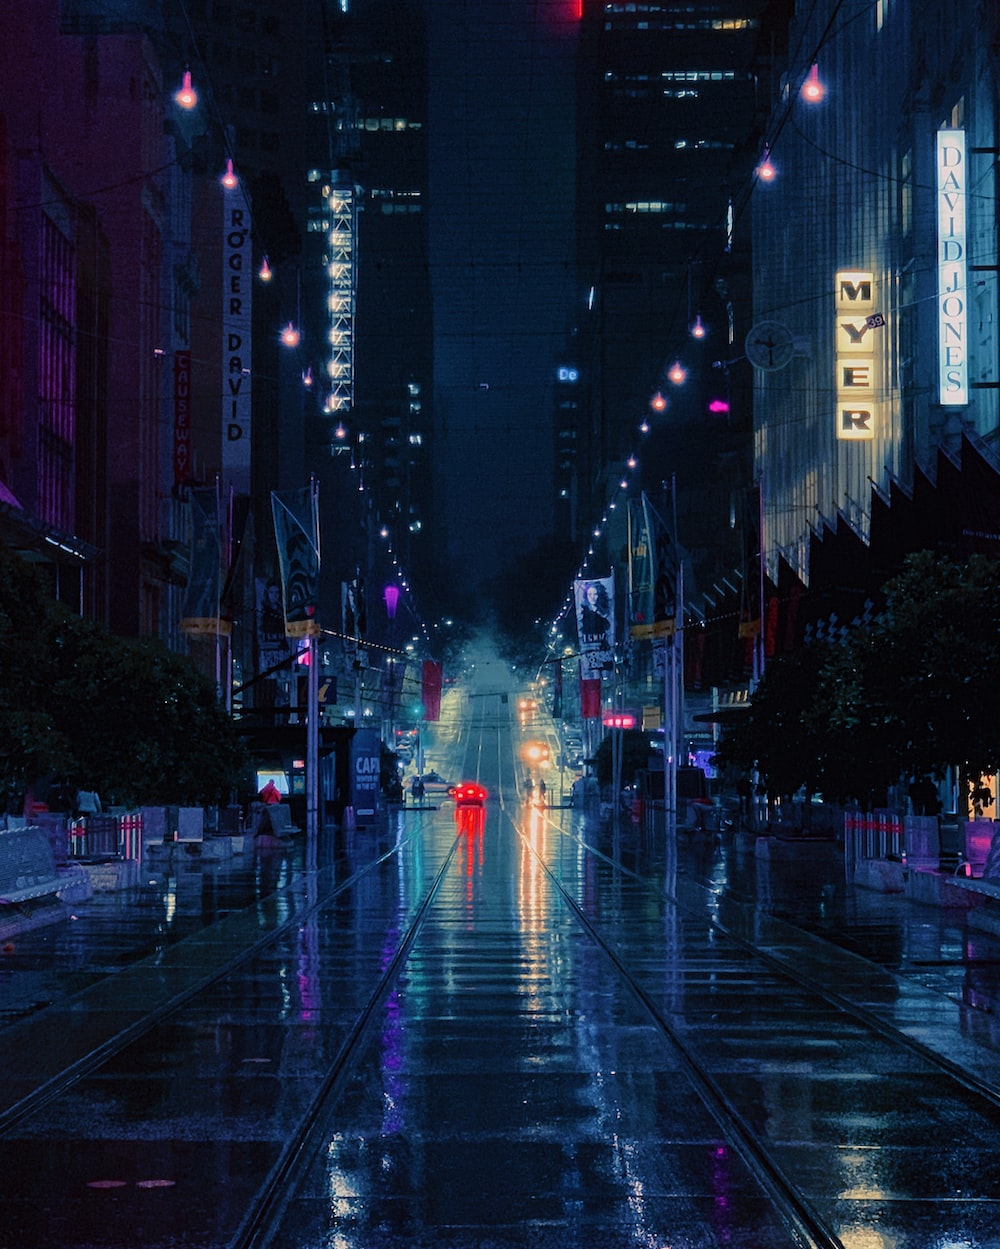 LO FI / Chillhop / Jazzhop / Retrowave Best Free Wallpaper, Cloud, Outdoor And Background Photo